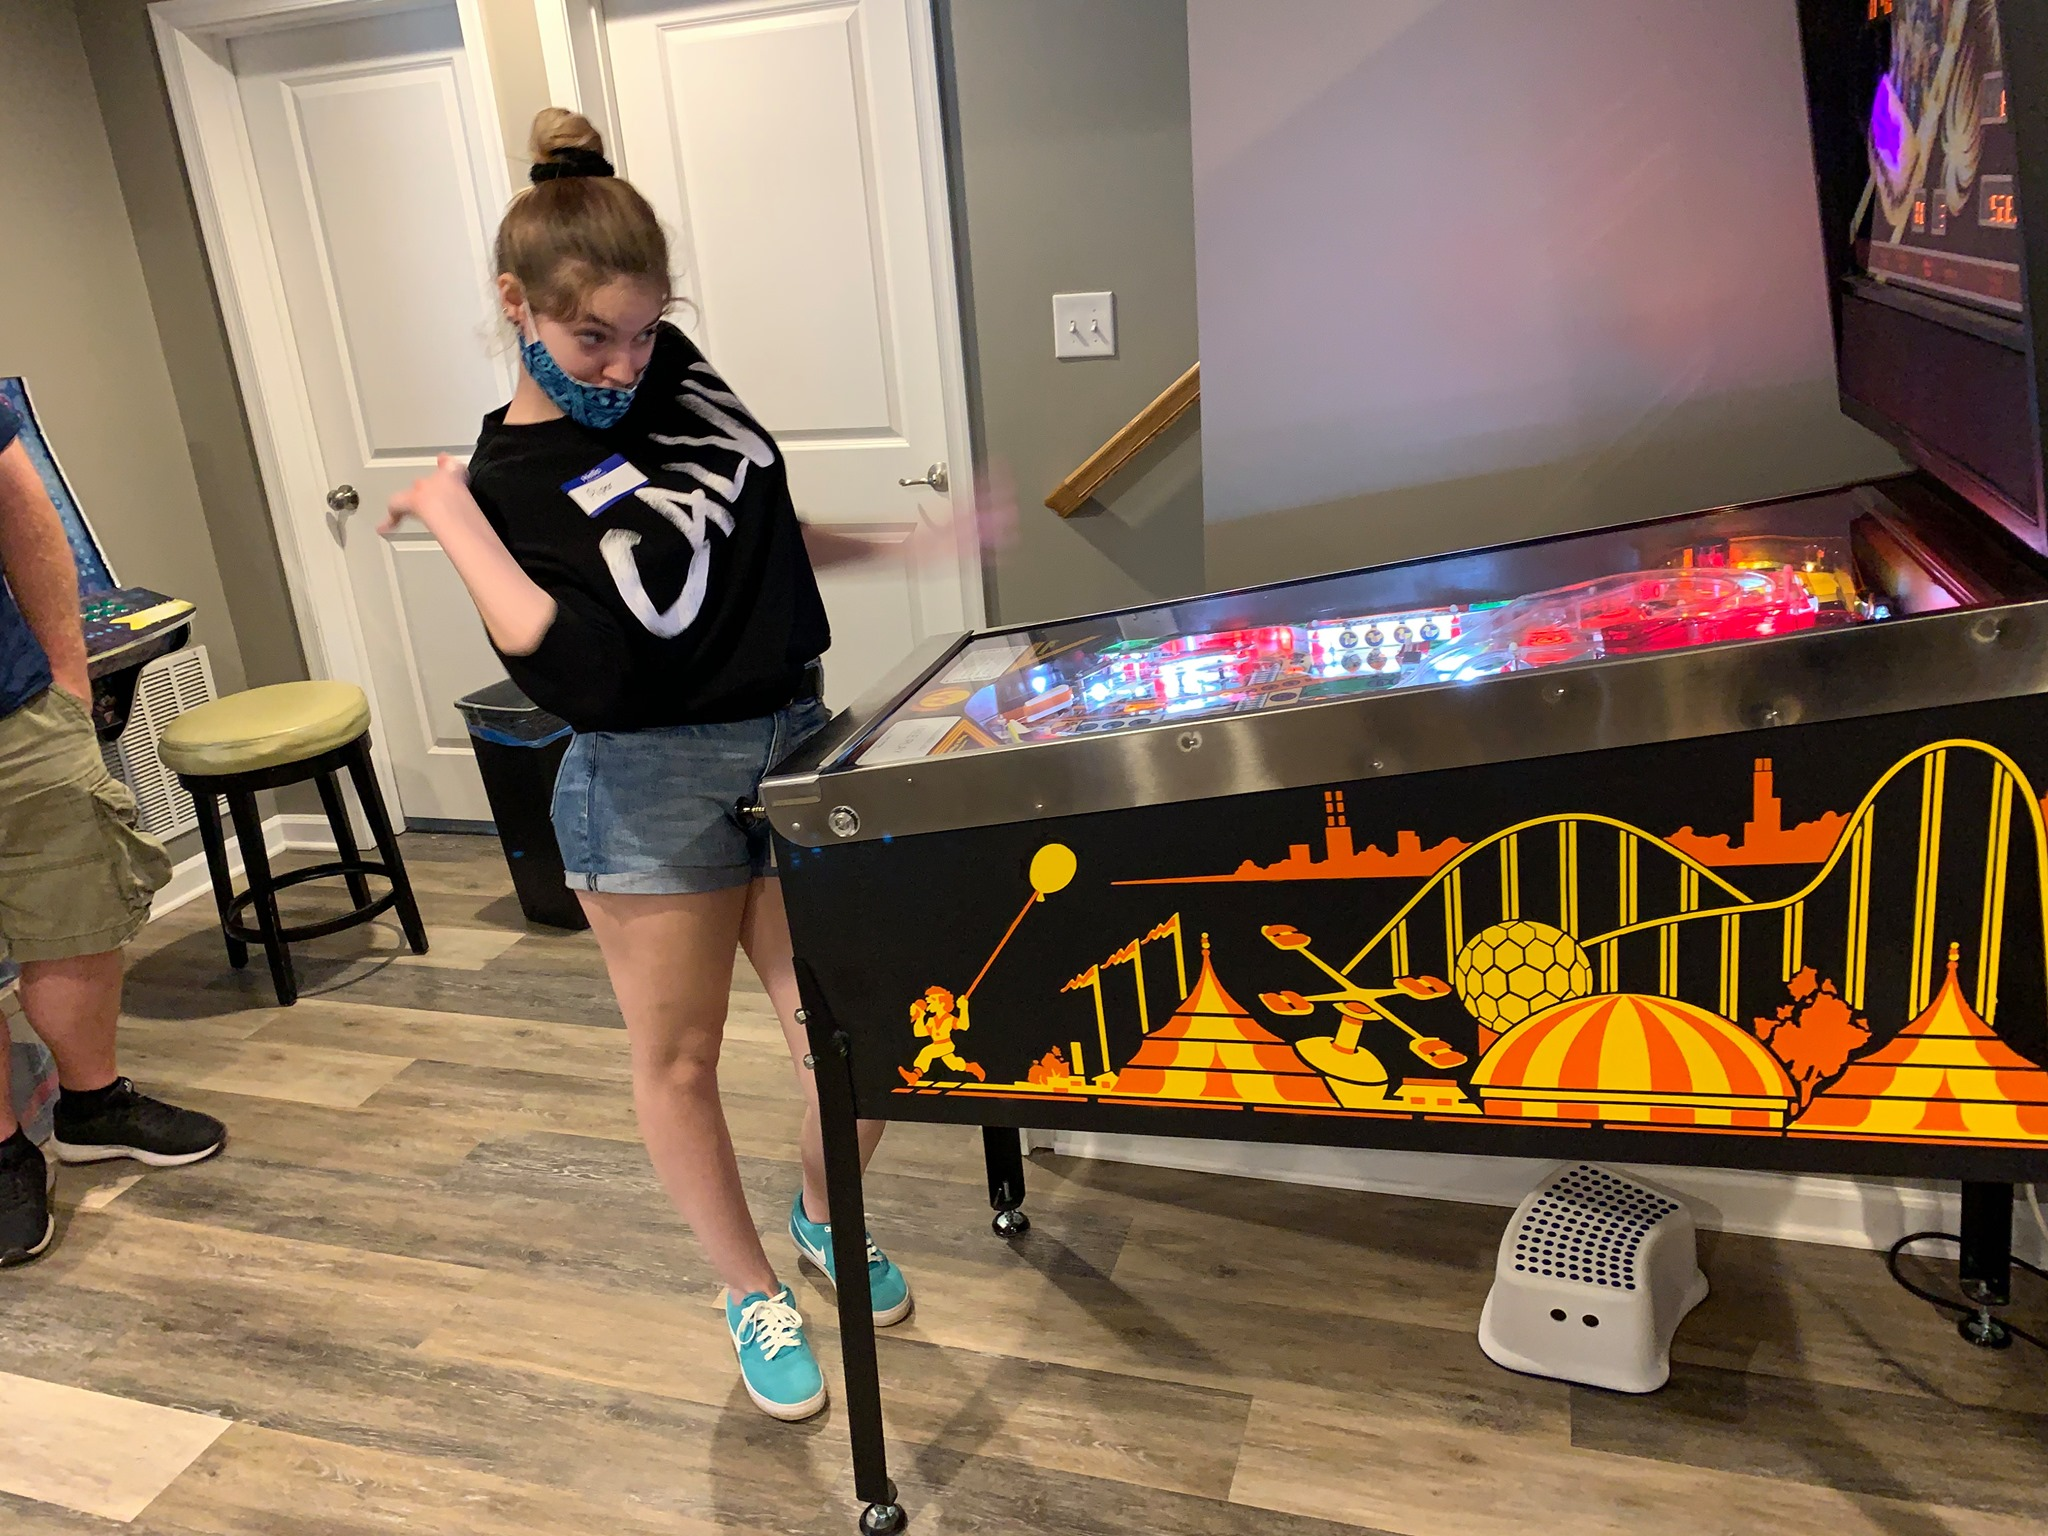 Delaware Pinball Collective Is a Hotspot for Top Players